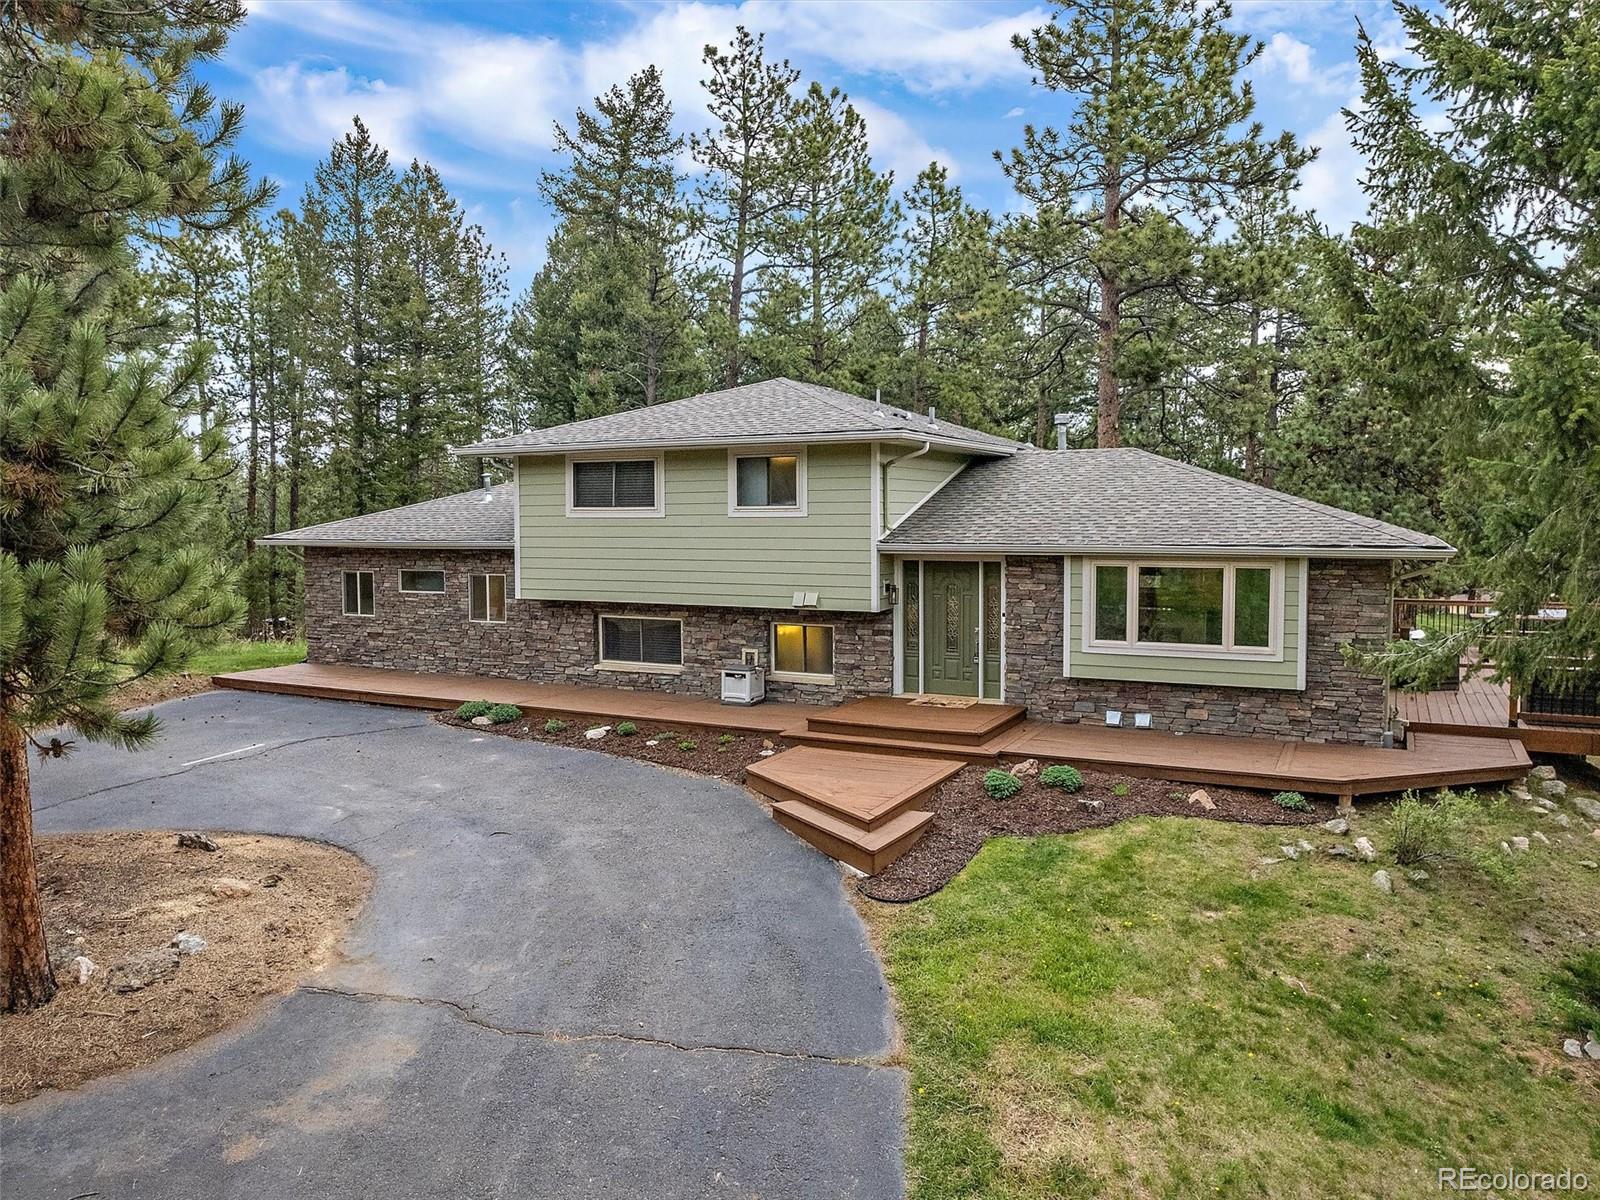 Report Image for 27737  Whirlaway Trail,Evergreen, Colorado